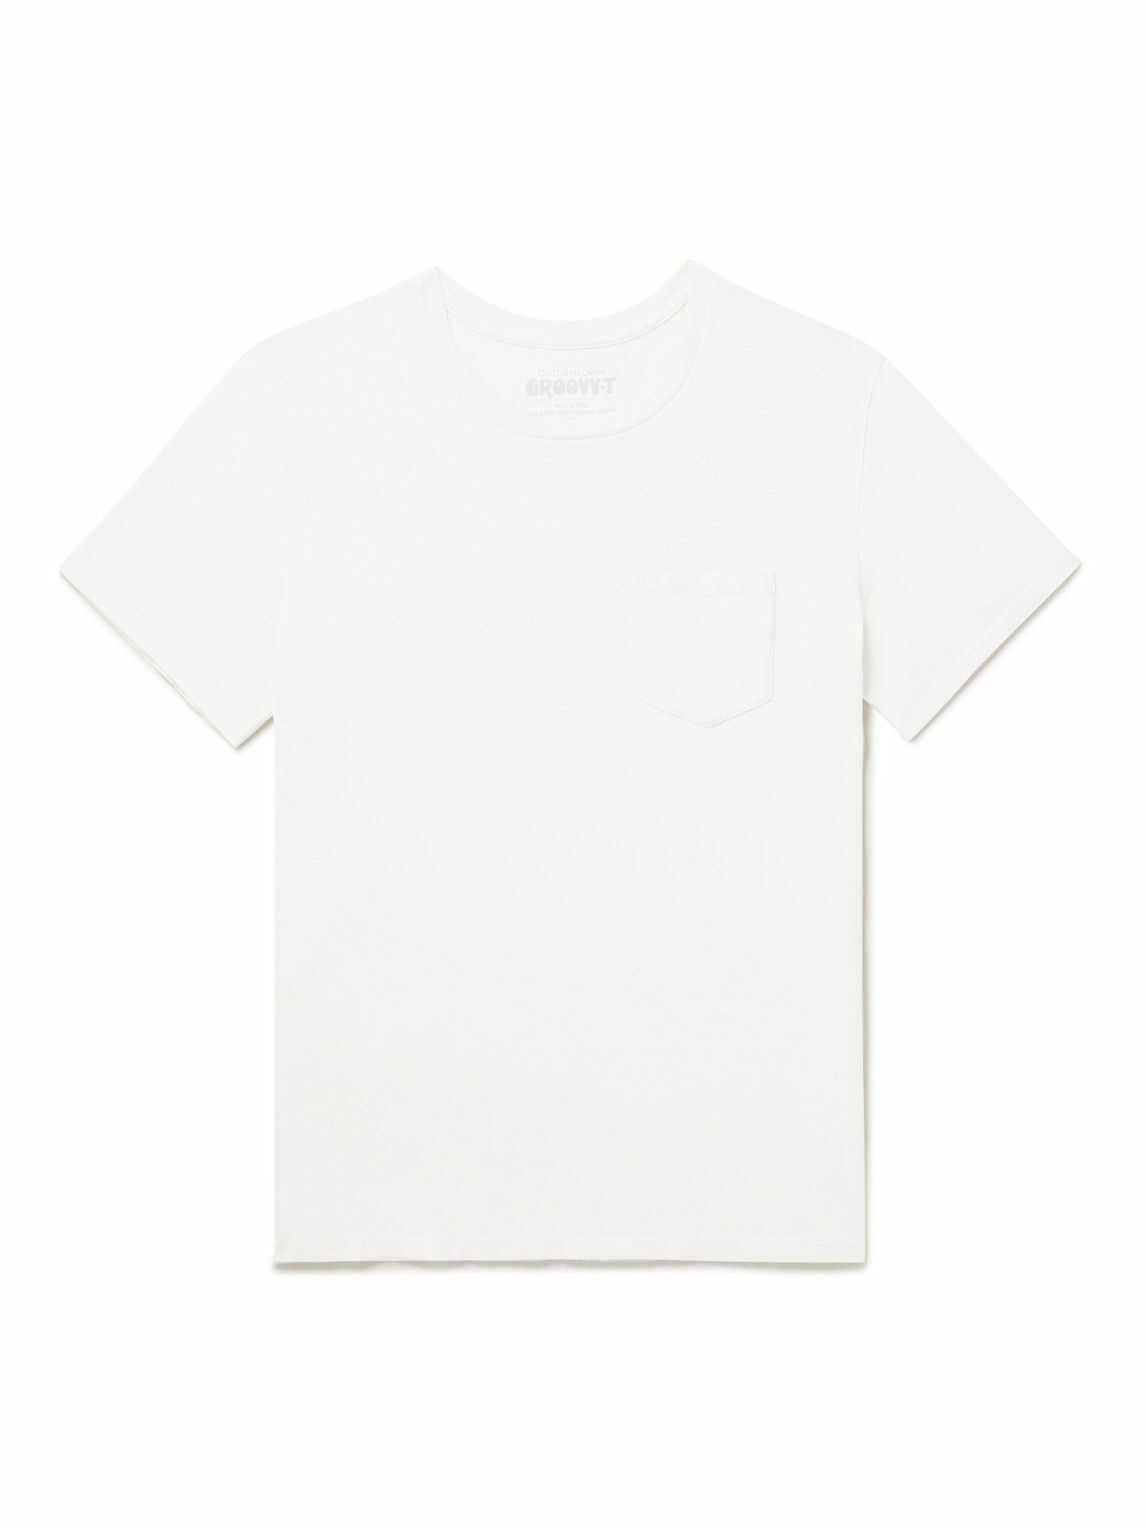 Outerknown - Groovy Pocket Organic Cotton-Jersey T-Shirt - White Outerknown